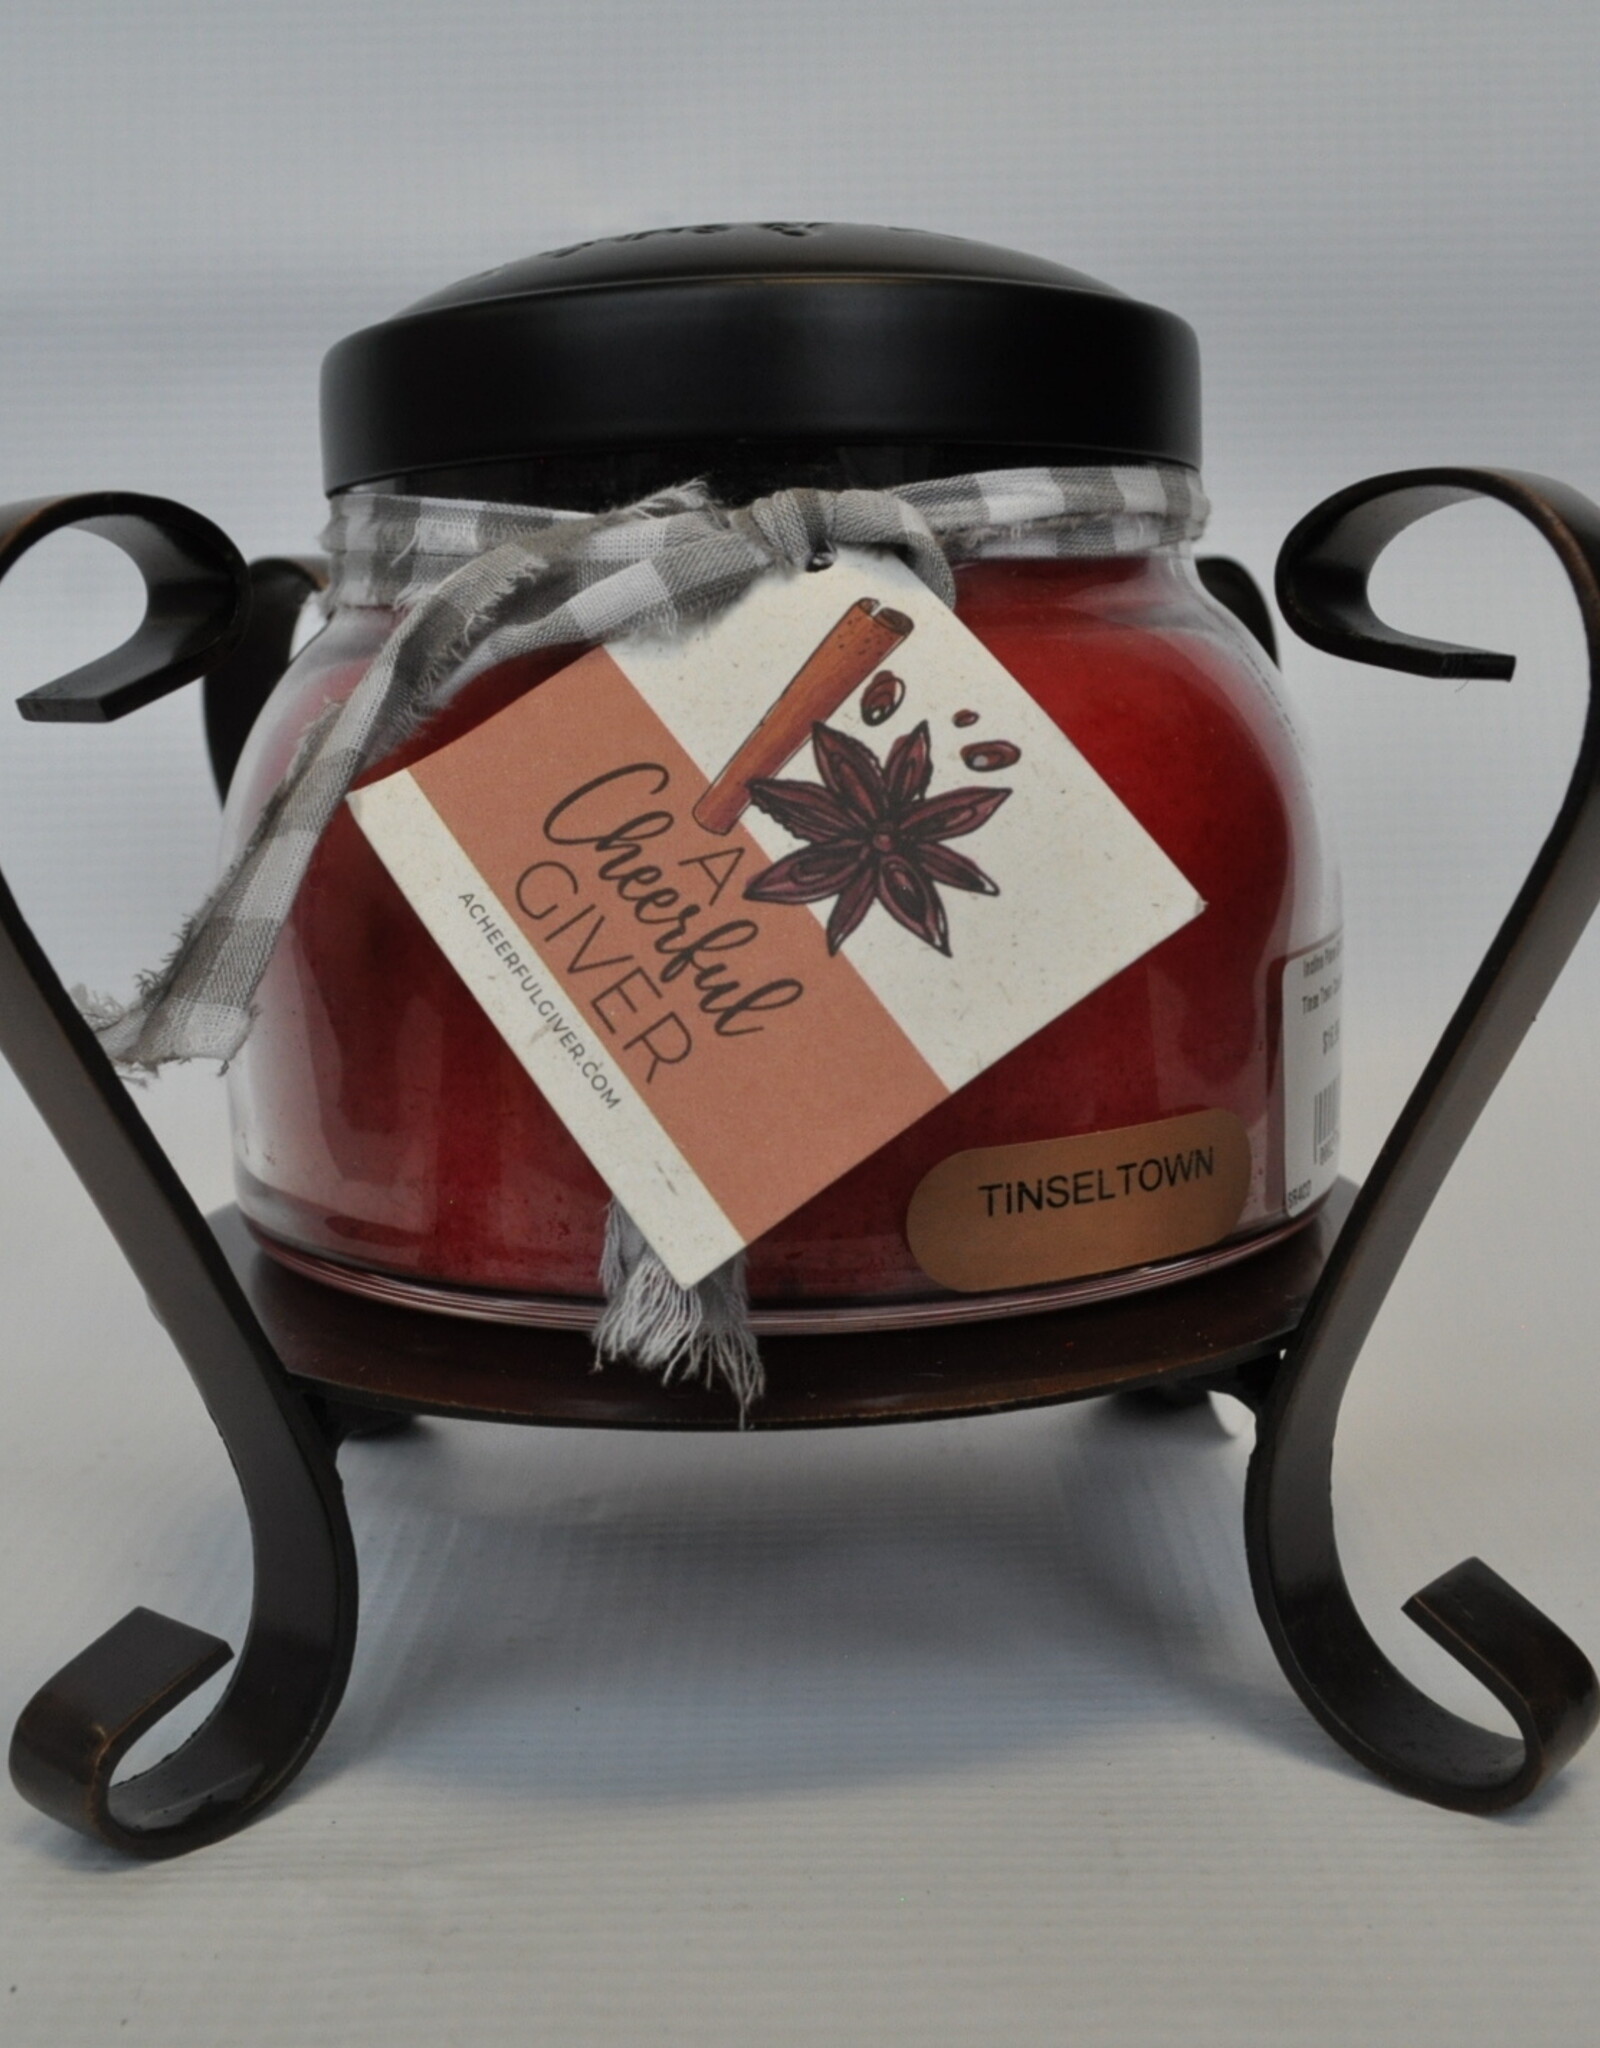 Cheerful Giver Tinsel Town Candle 22oz